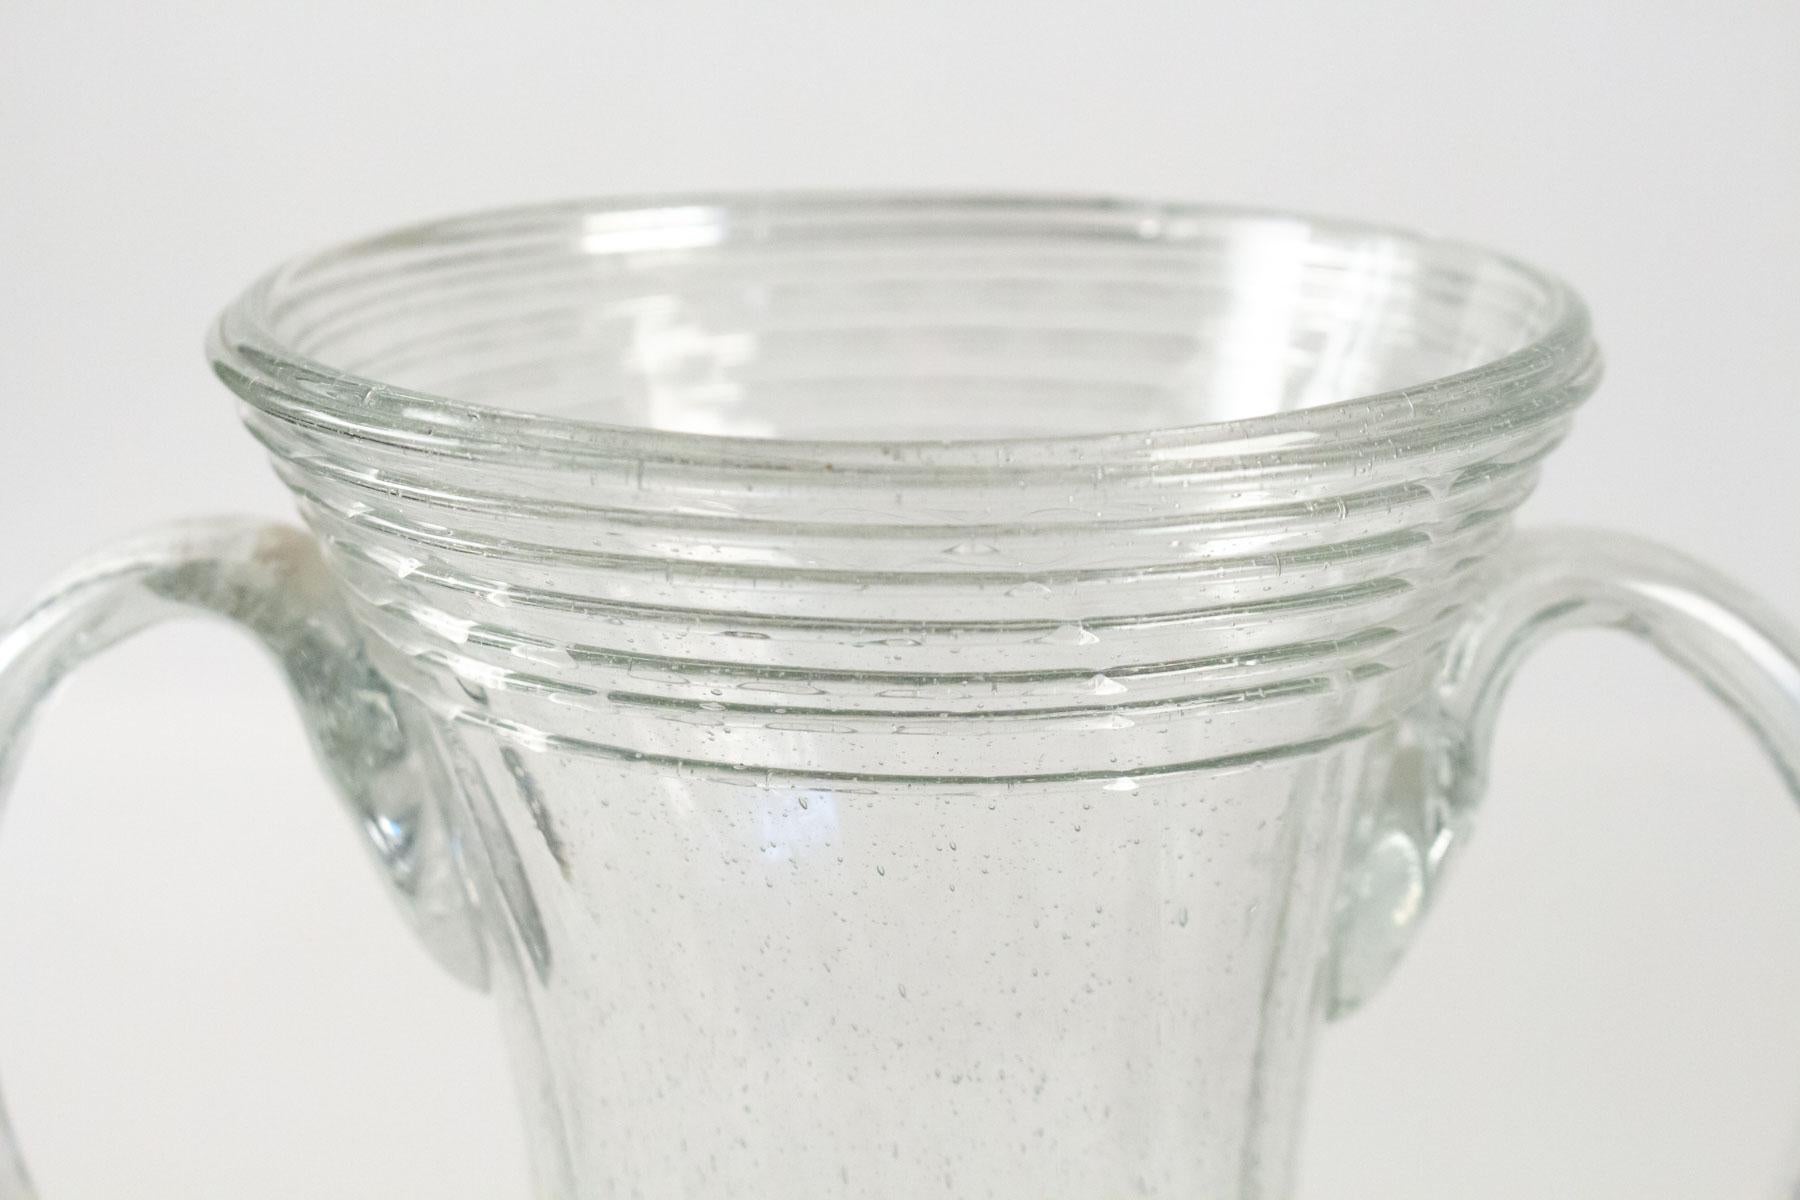 French Glass Vase From Normandy, Rouen, France, 19th Century, Old Dishes